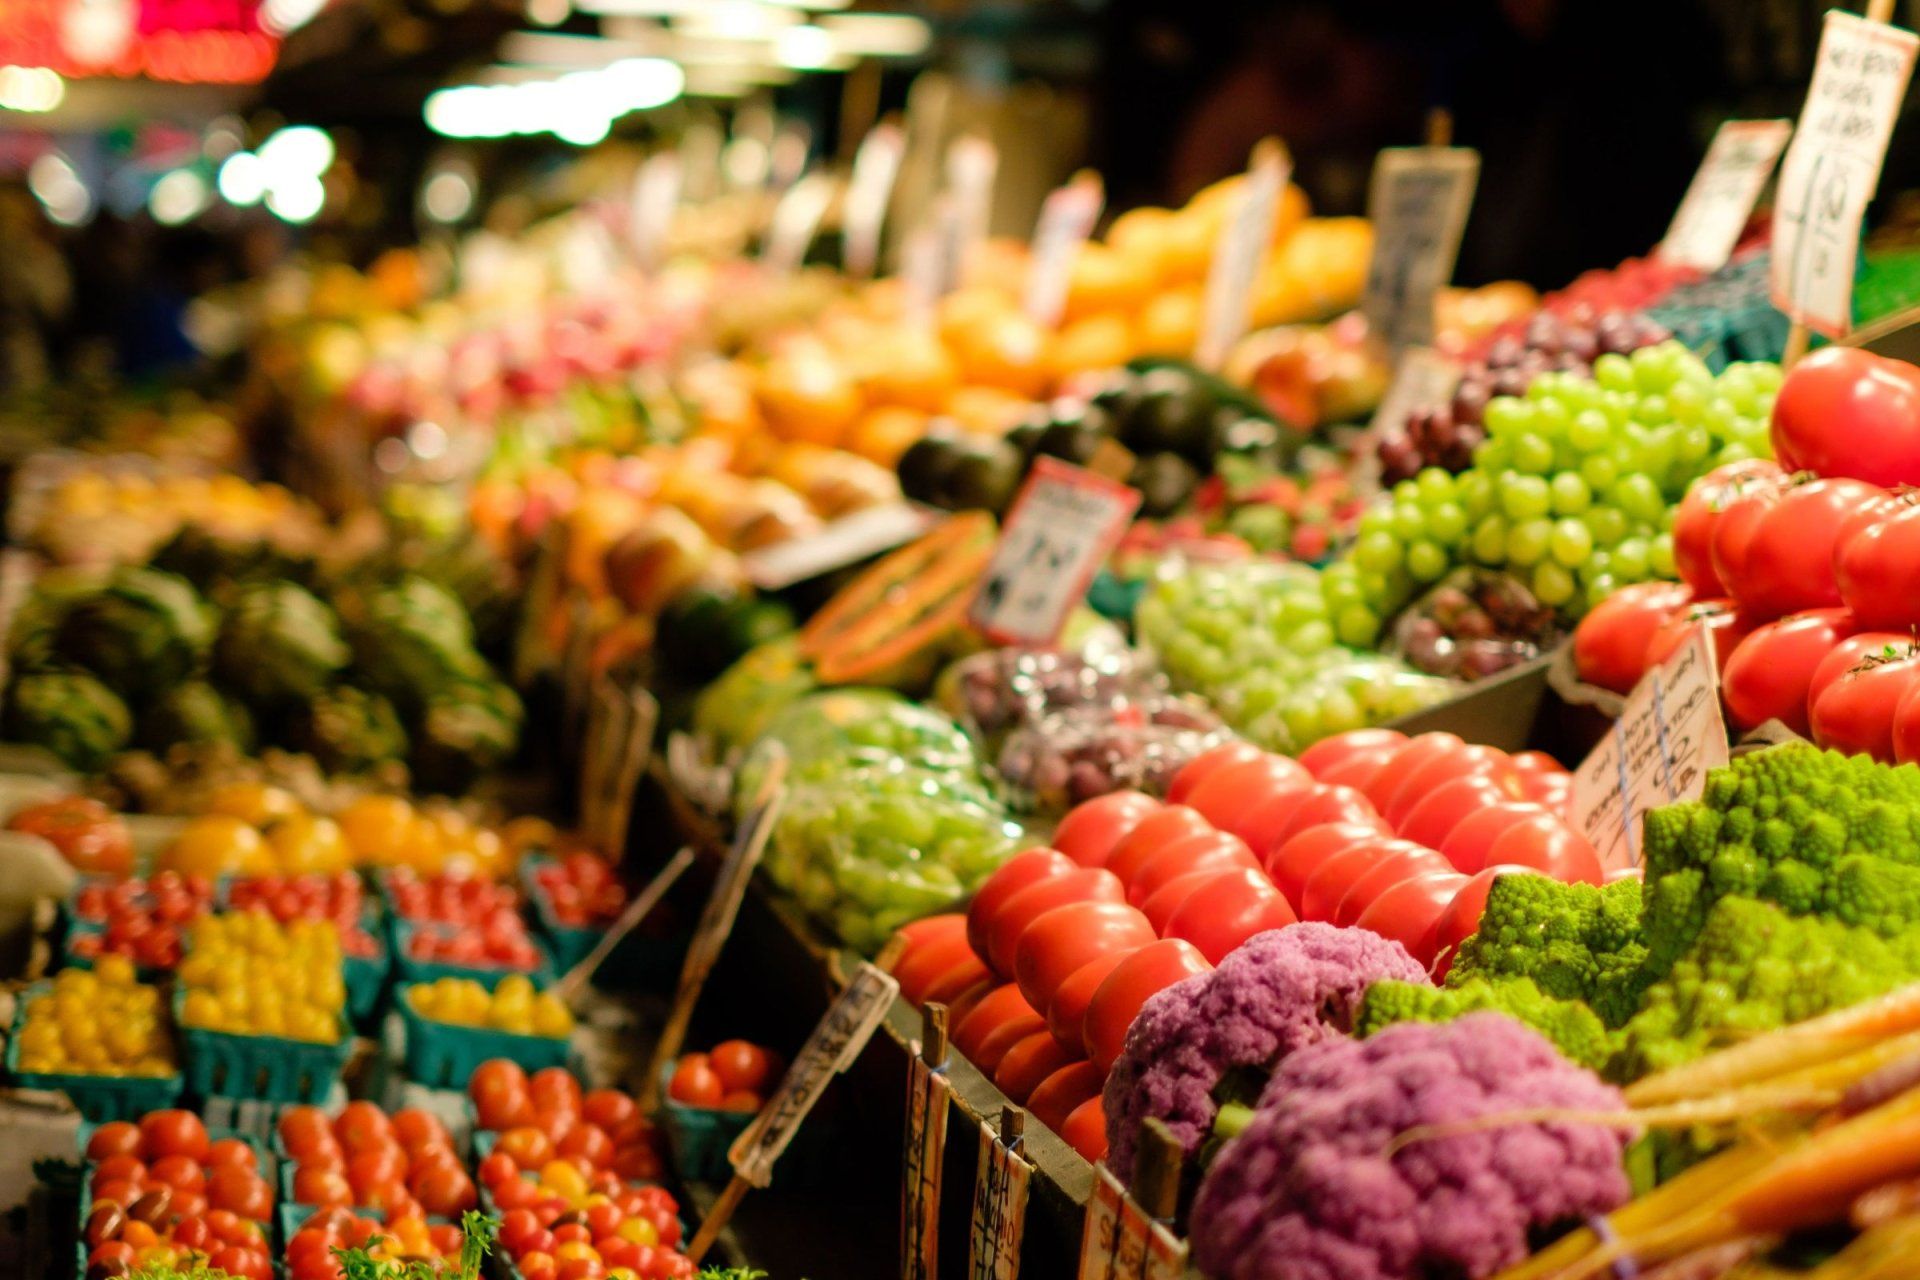 a variety of fruits and vegetables are for sale at a market